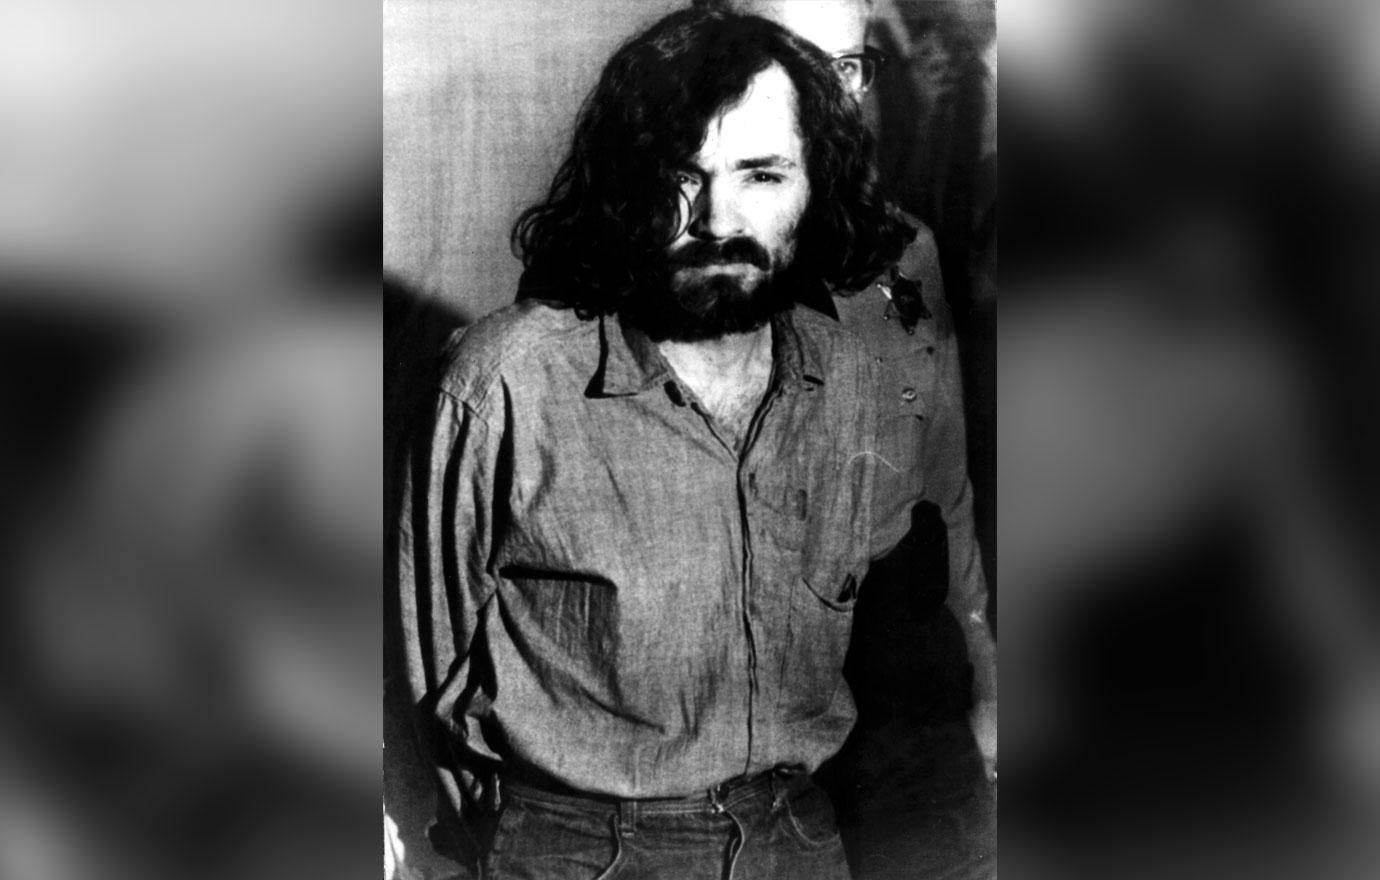 Was Afton Star Burton In Love With Charles Manson Or Just After Legal